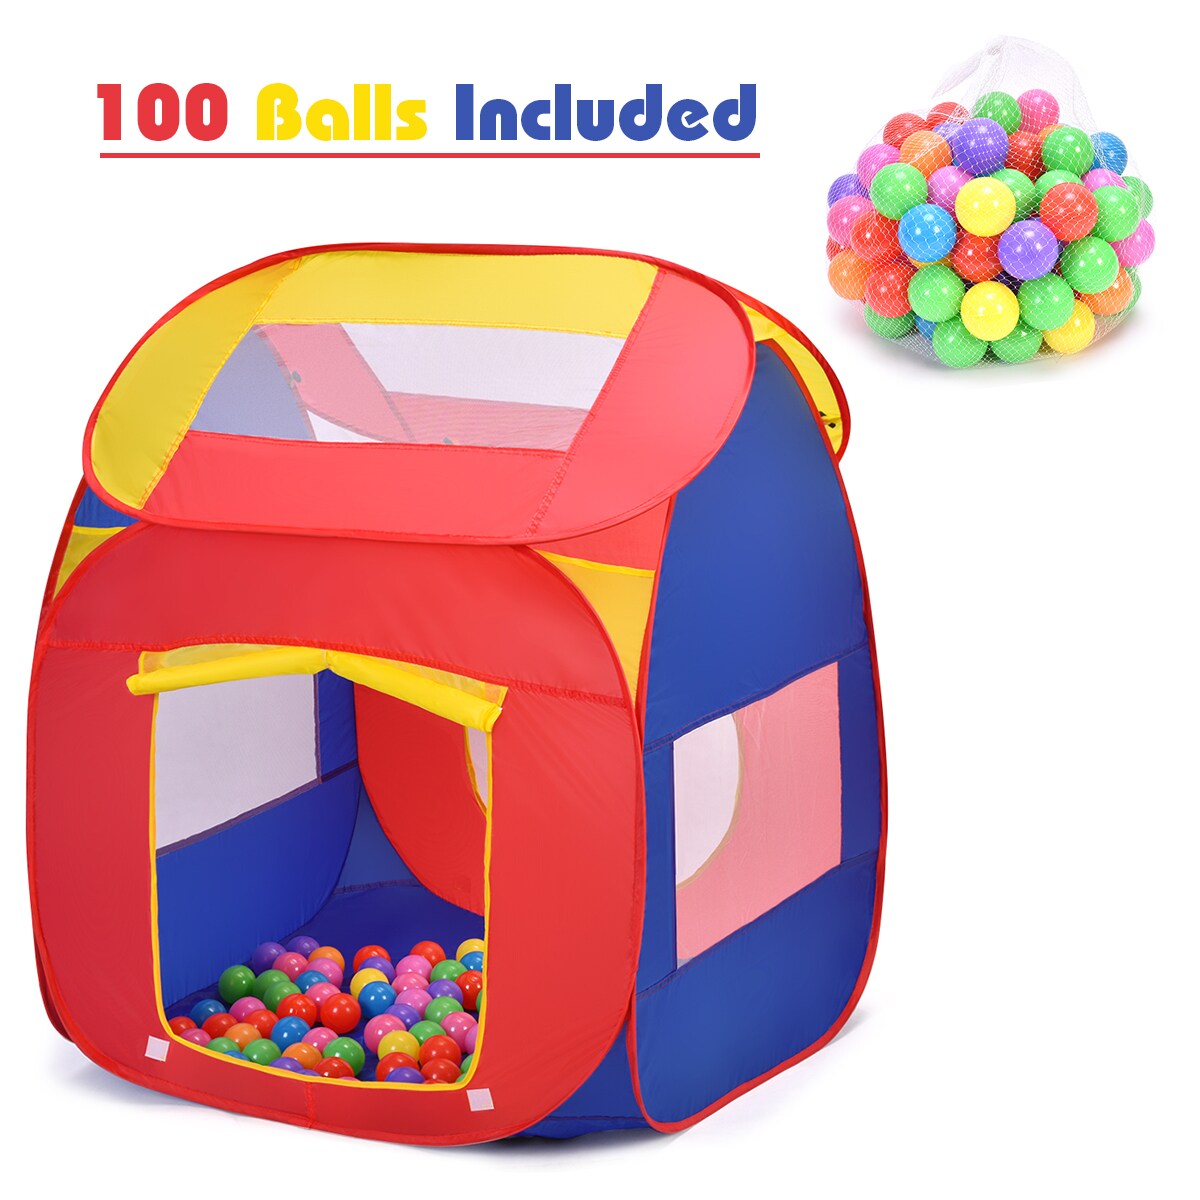 Portable Ocean Ball Pit Pool Creative Pretend Play Play Tent Lawn Party Toy 